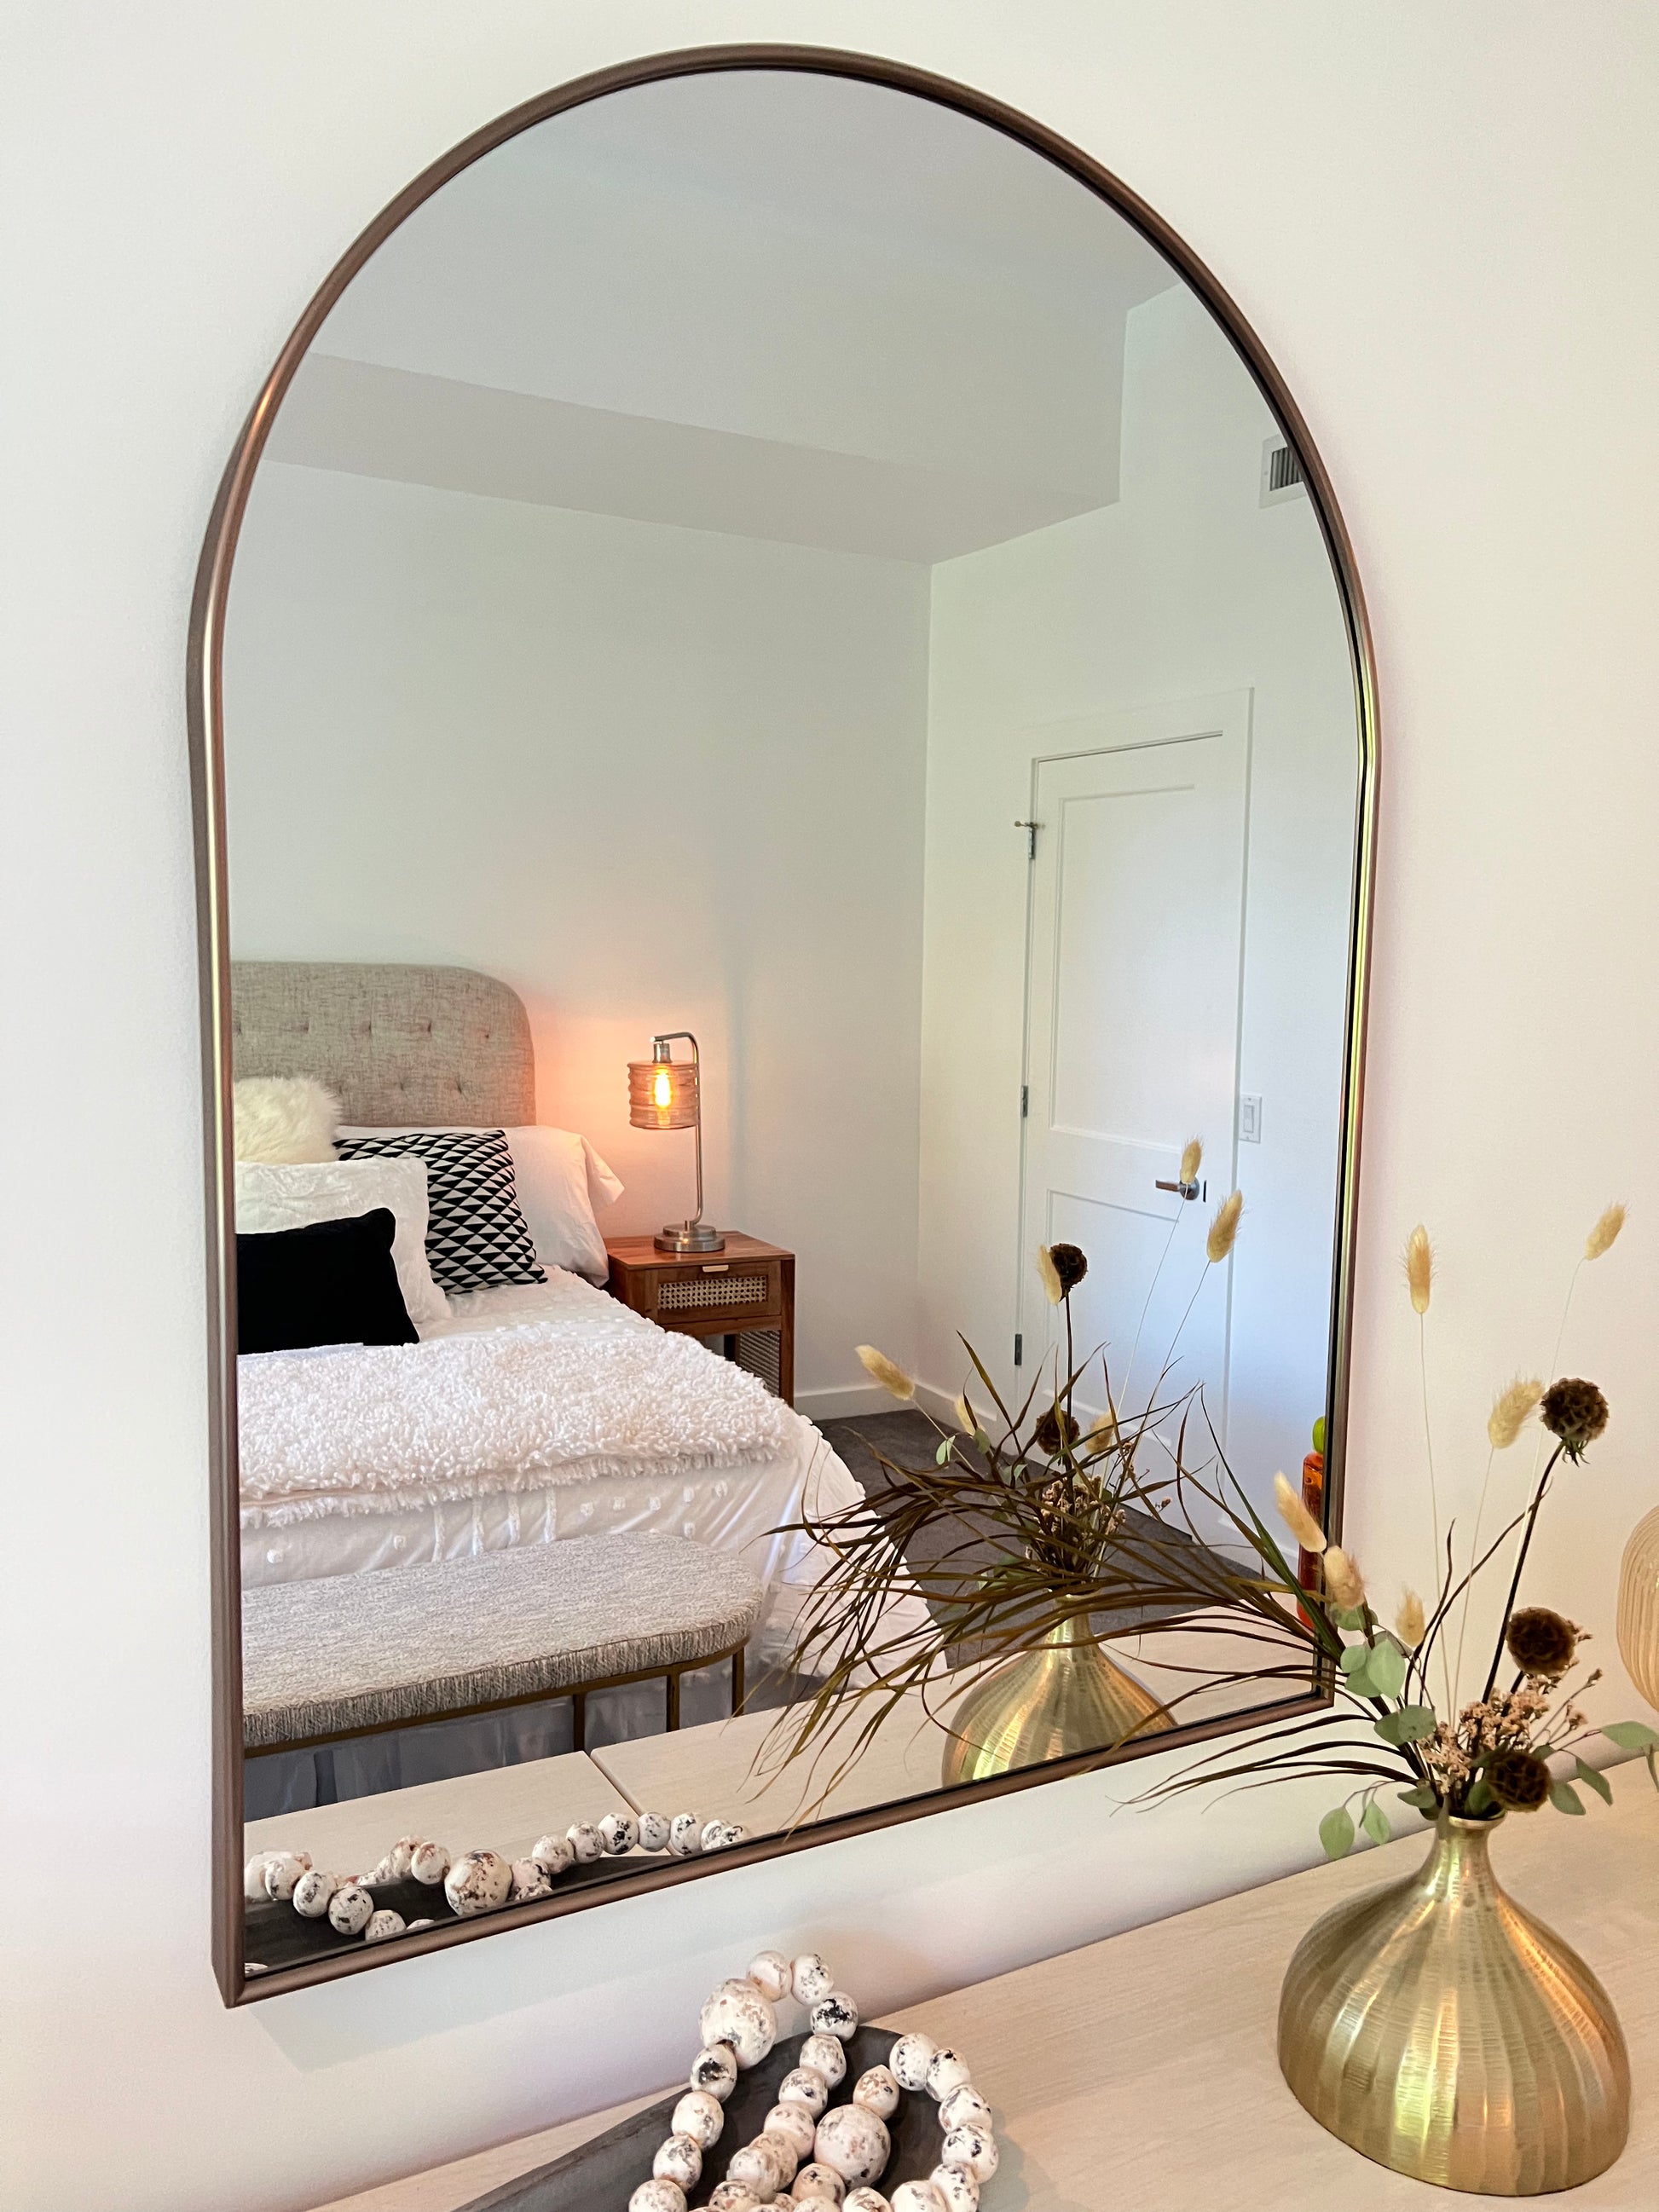 How to Make a Large Arched Mirror - Jenna Sue Design